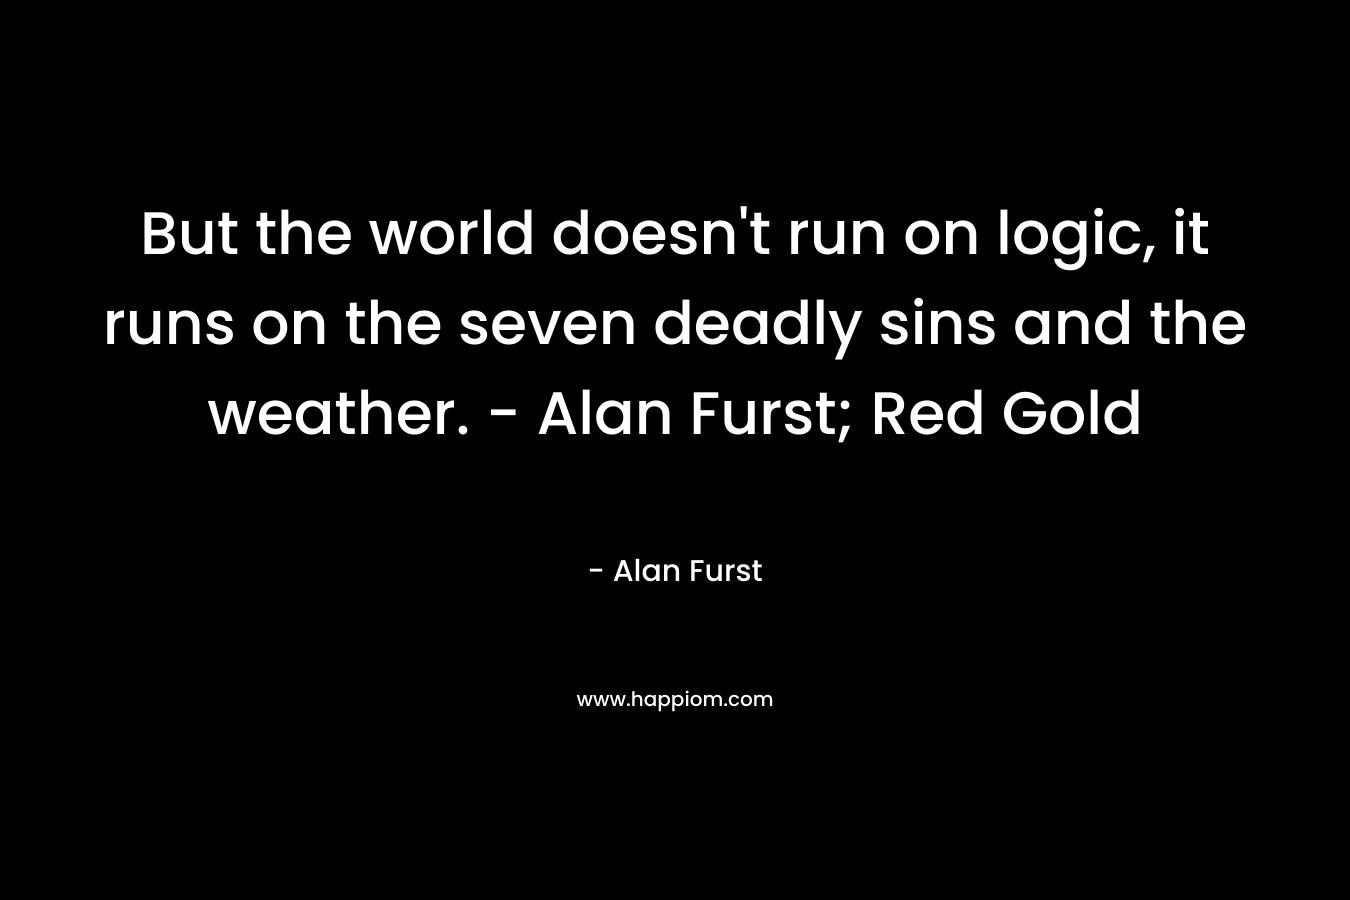 But the world doesn't run on logic, it runs on the seven deadly sins and the weather. - Alan Furst; Red Gold